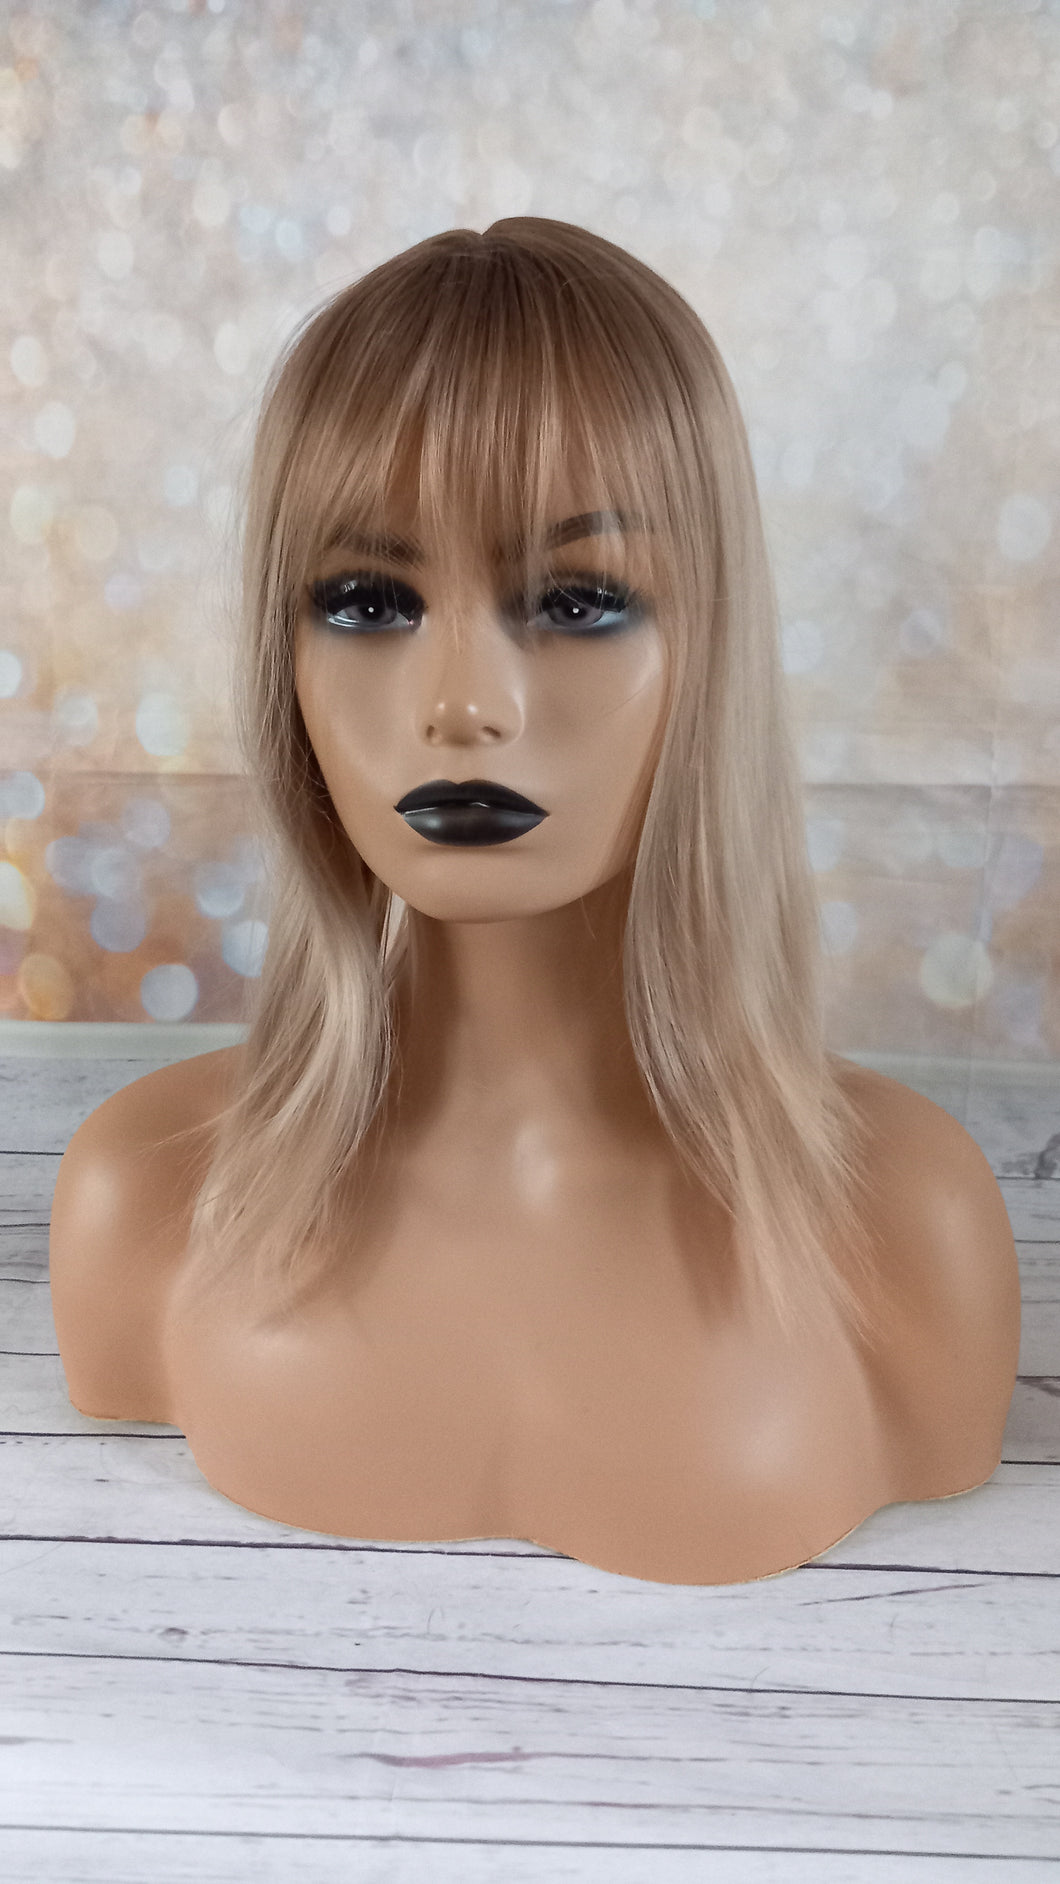 Clearance-Fibre topper, faux silk base, realistic part, balayage blonde 14 inches